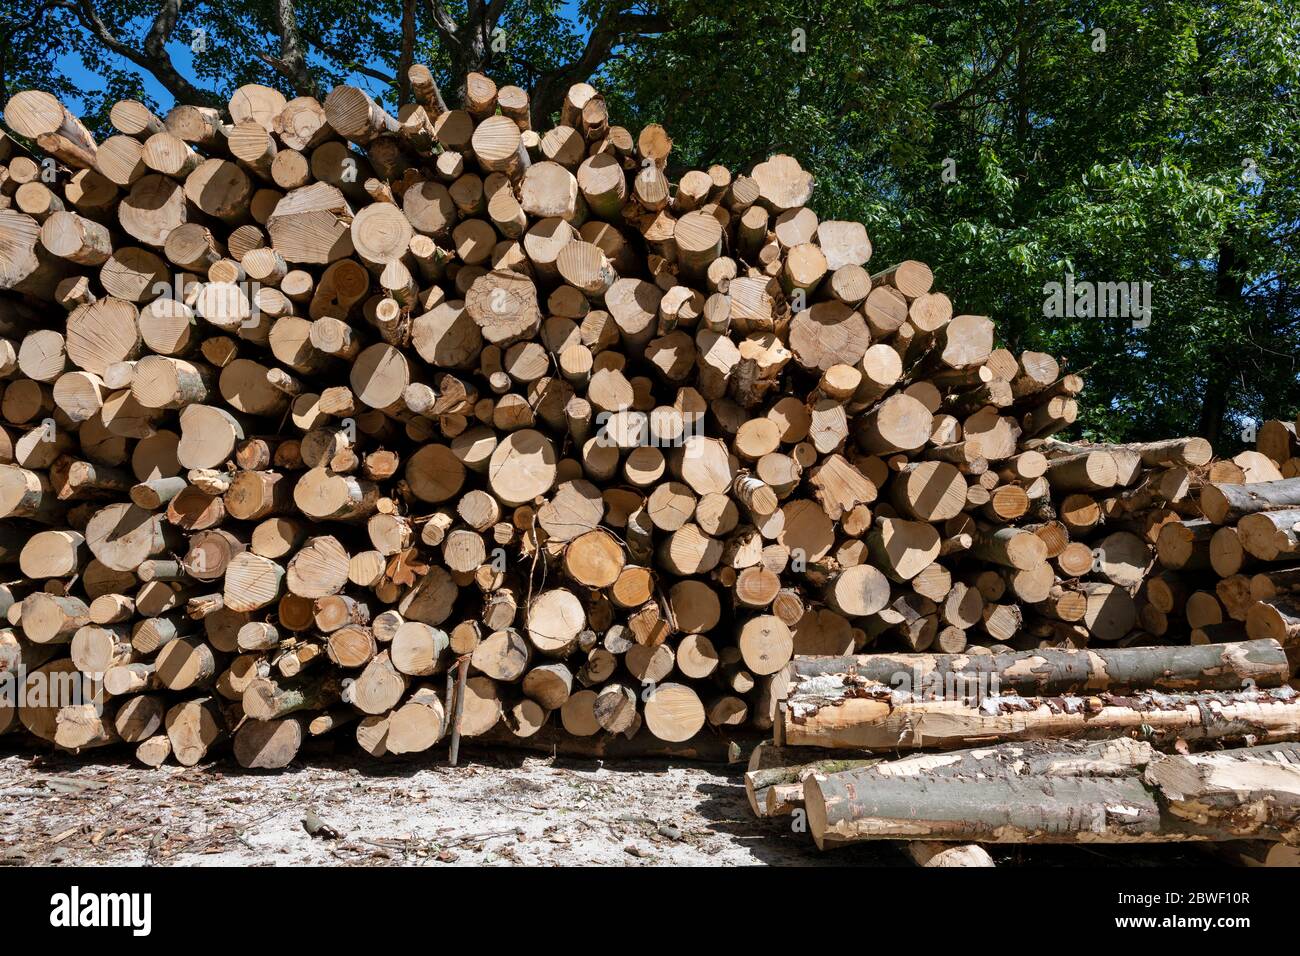 Stacked sections of beech, sycamore, birch and sweet chestnut hardwood trees awaiting processing into logs, Hovingham, North Yorkshire, UK Stock Photo